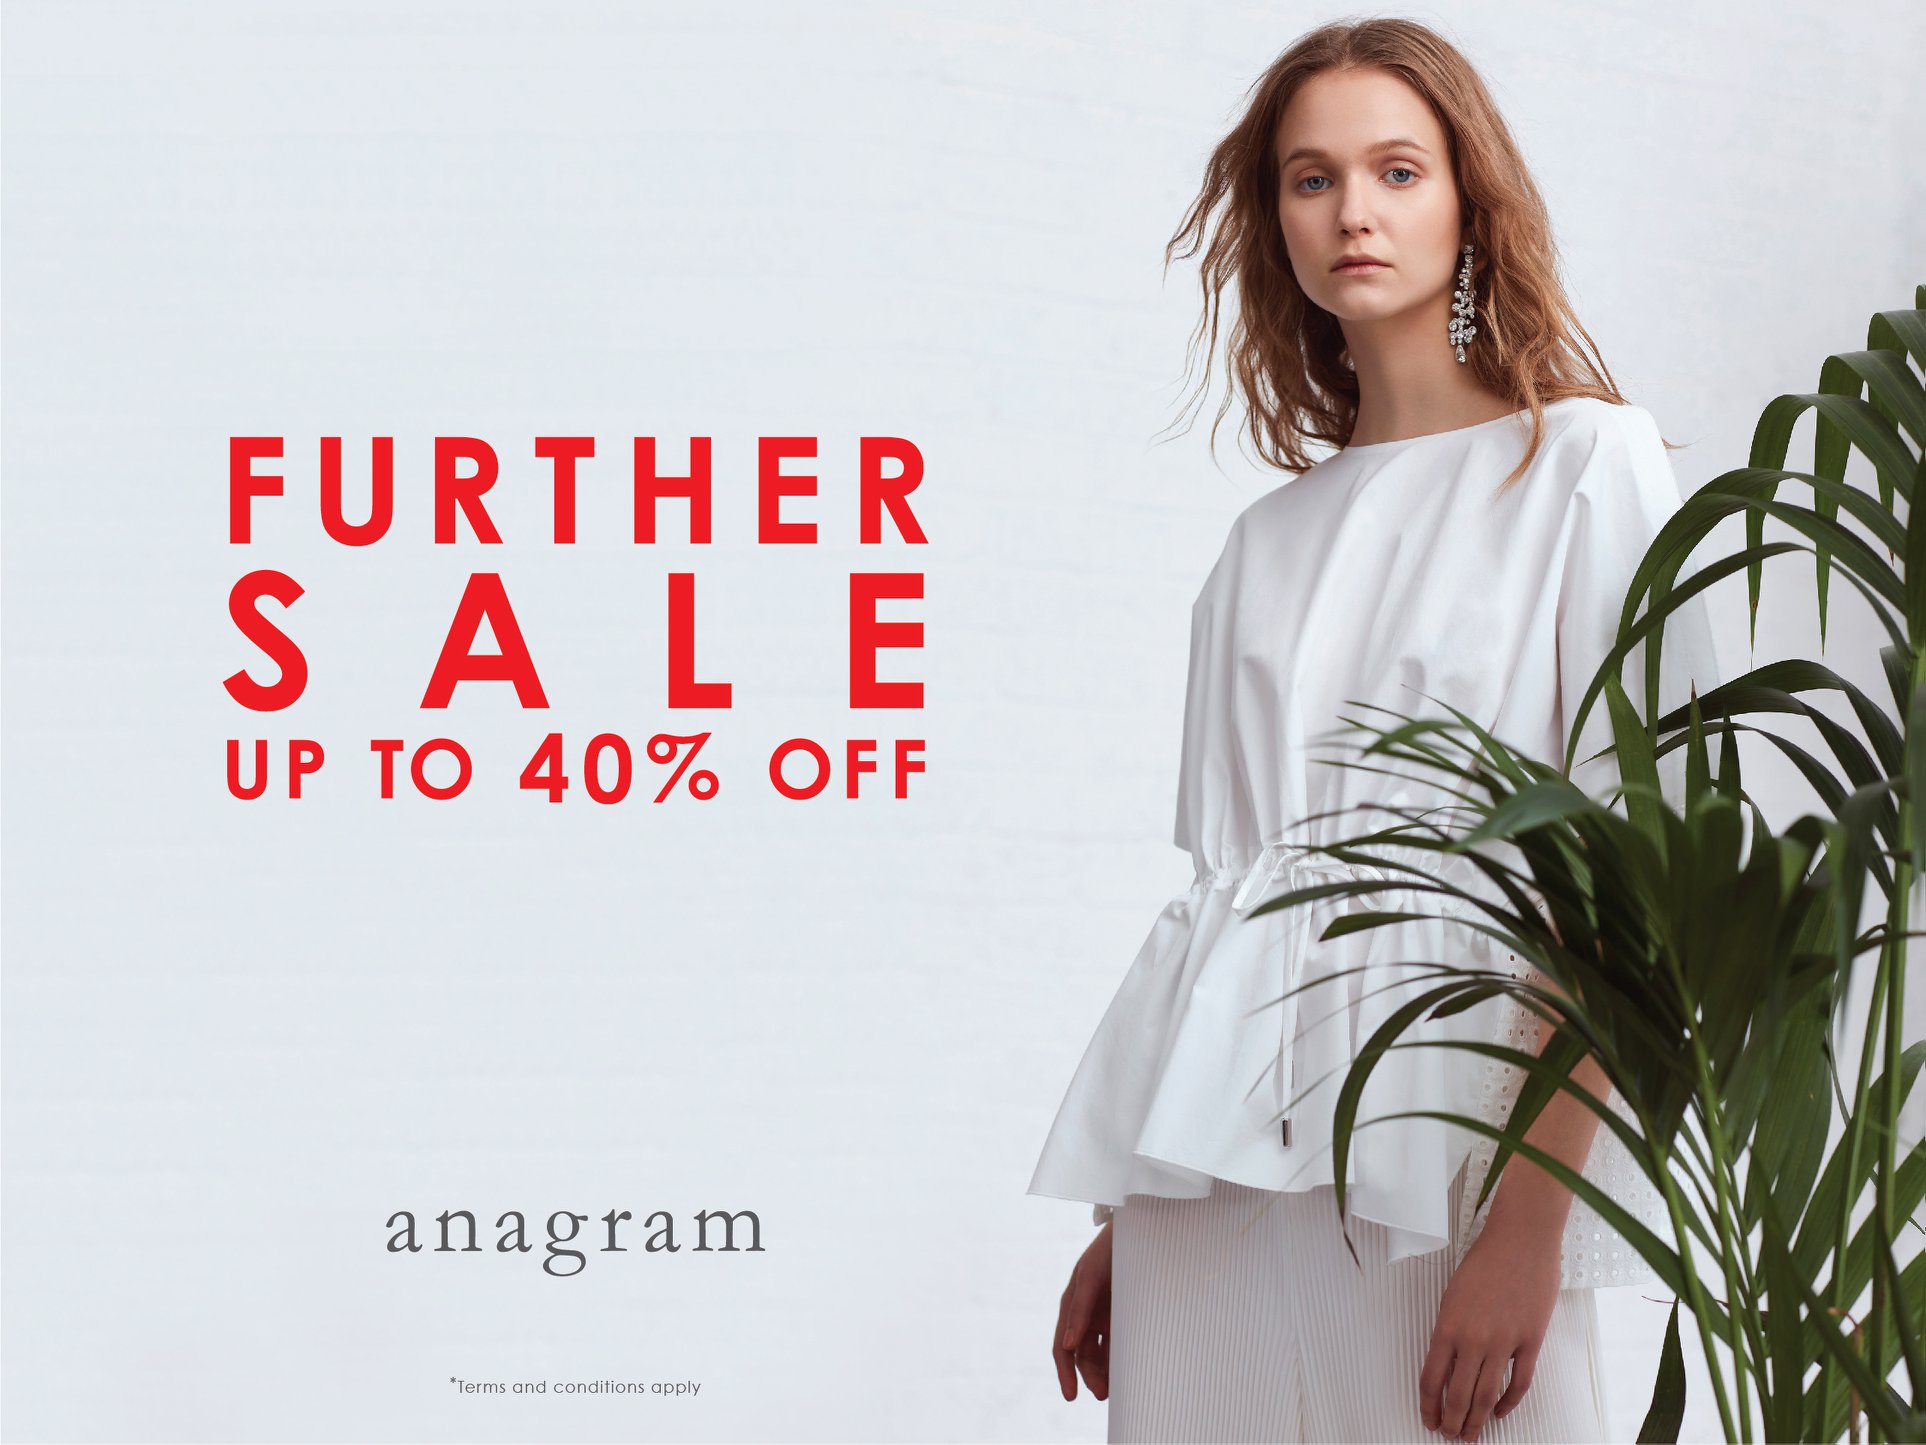 Up to 40% off, starting today!